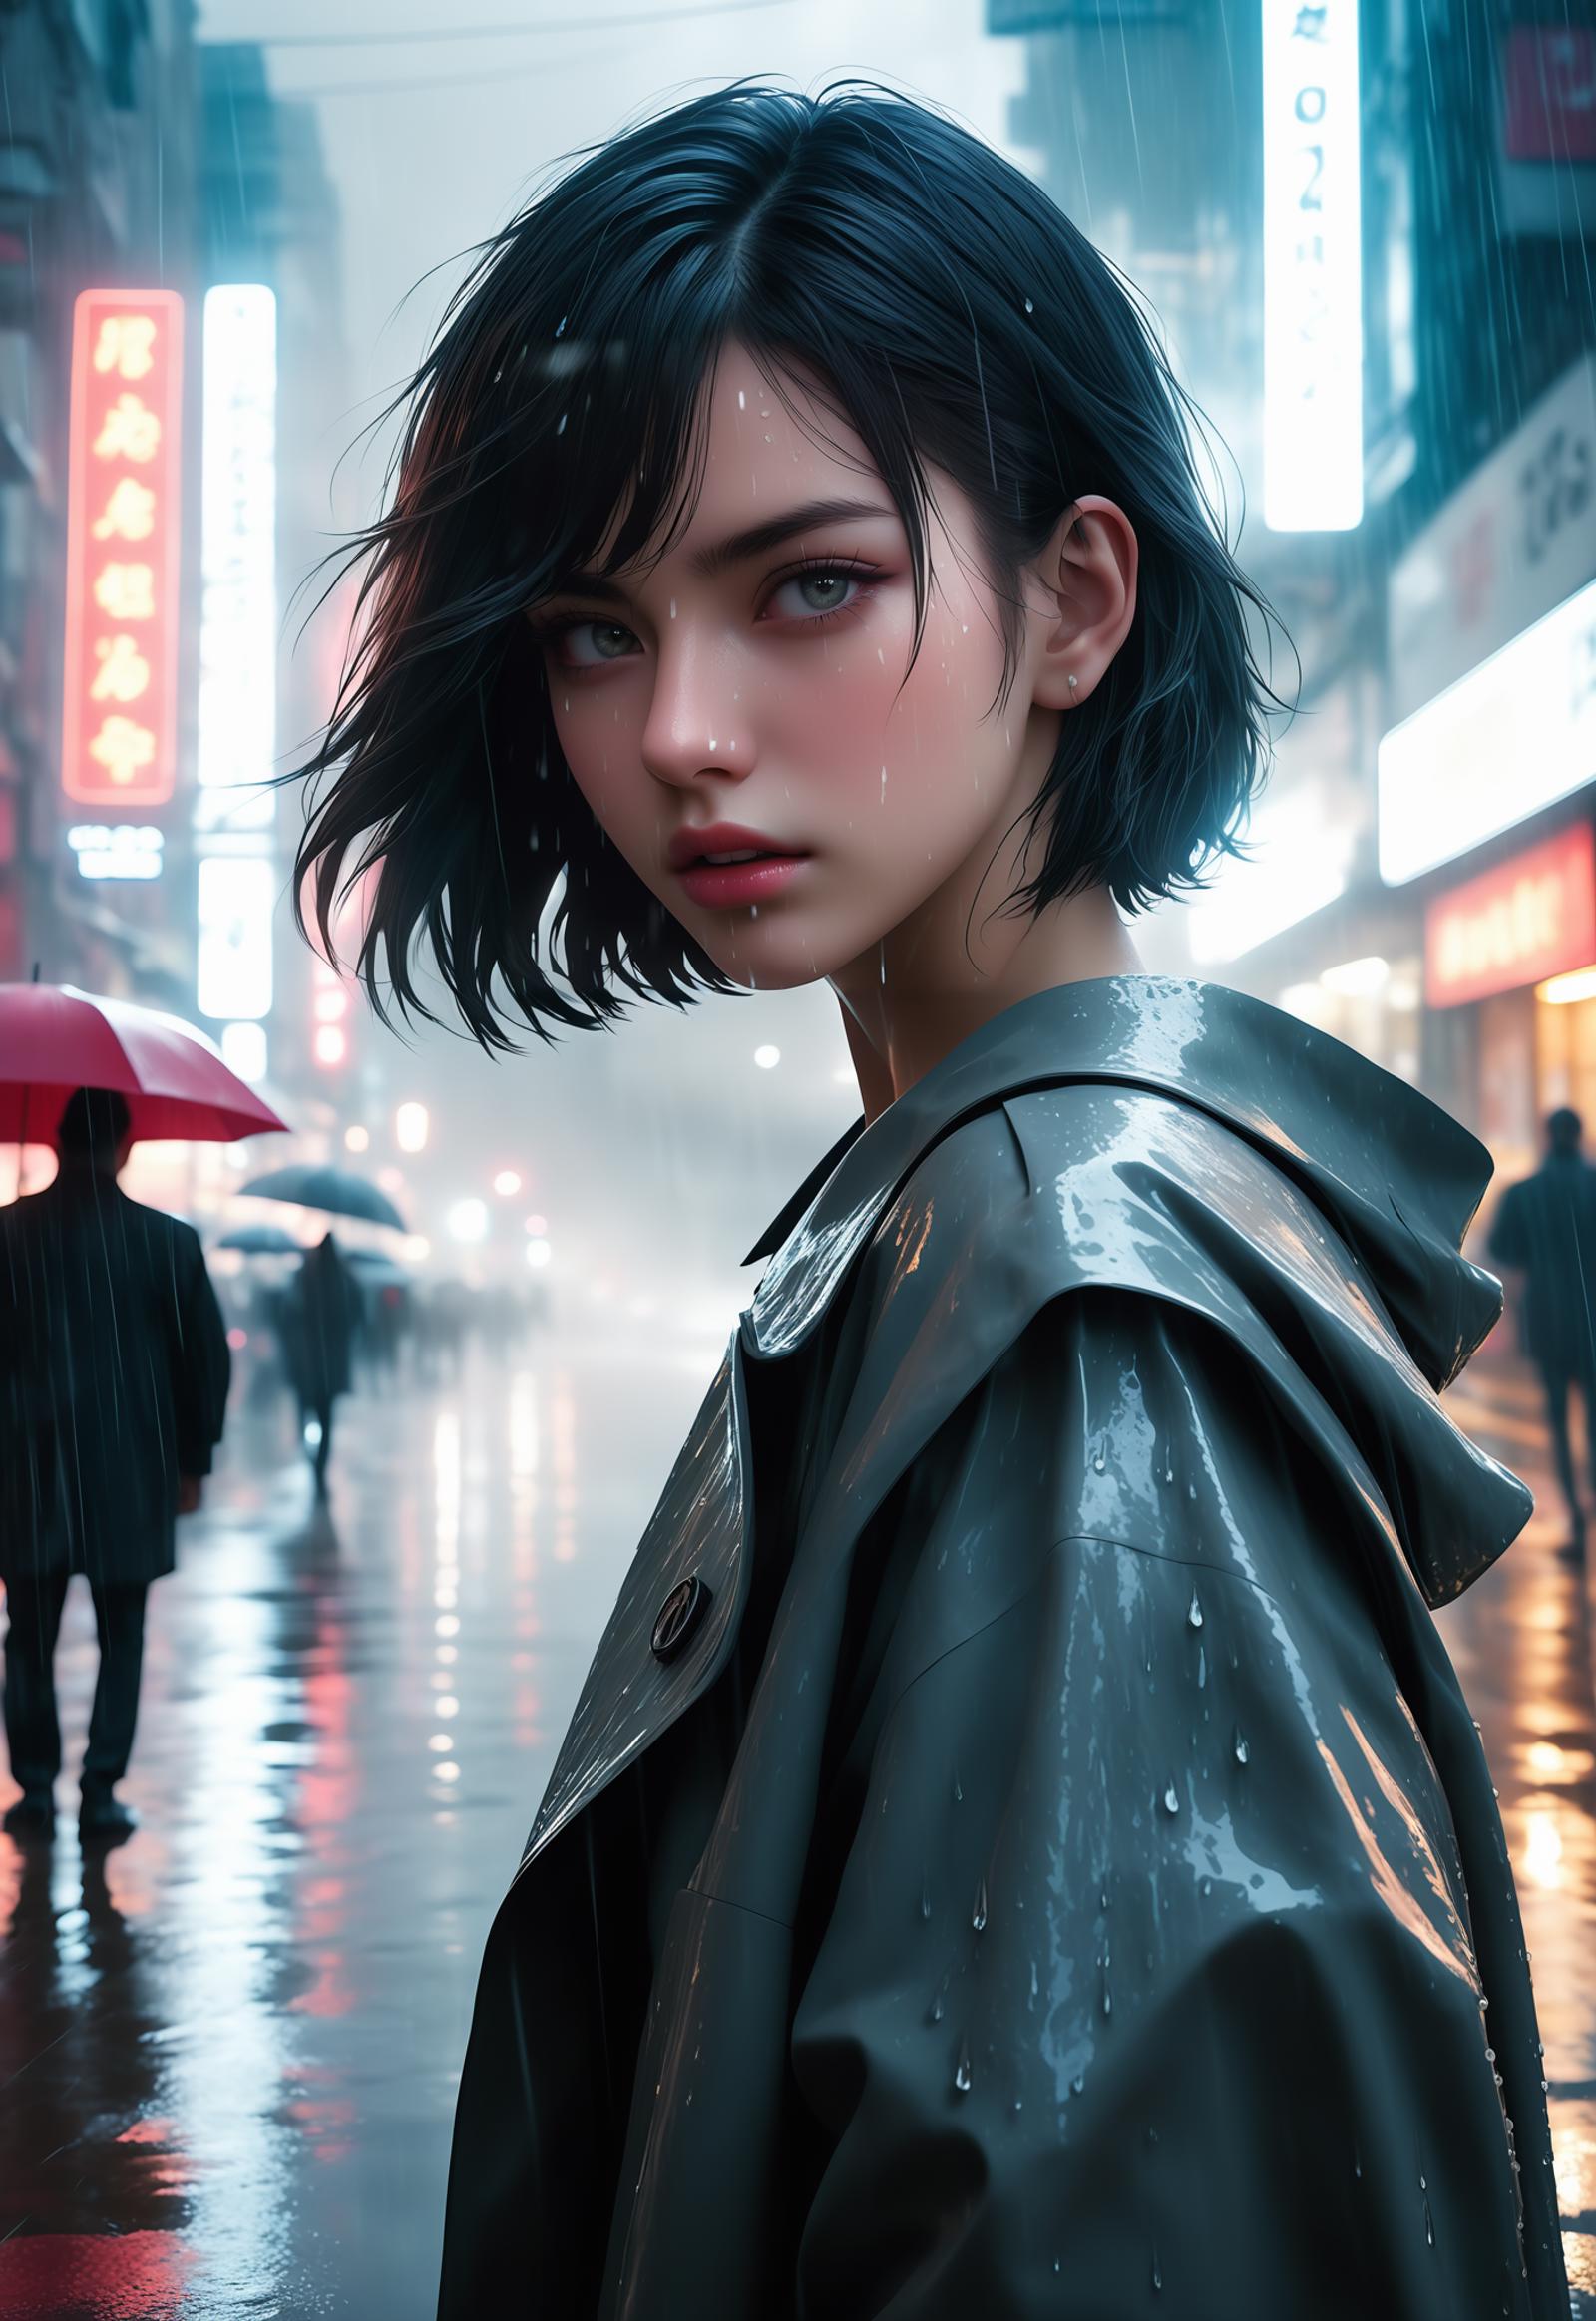 Woman with Green Eyes and Dark Hair in Rainy City Street